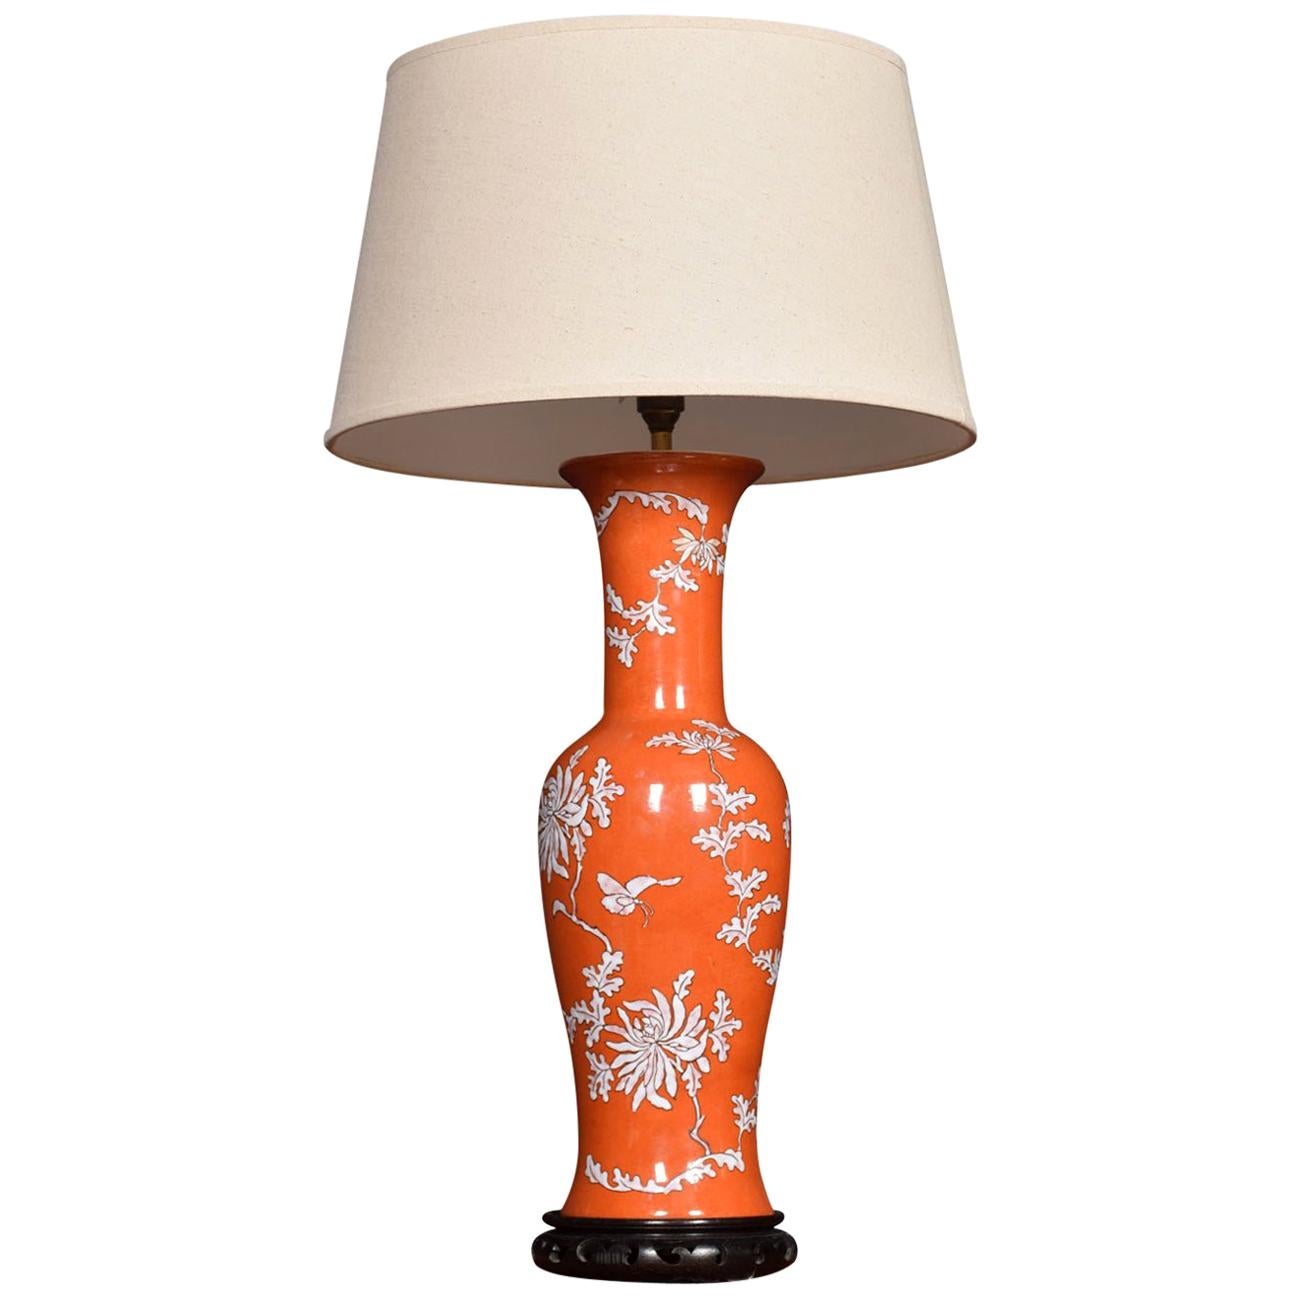 Chinese Baluster Form Porcelain Lamp For Sale